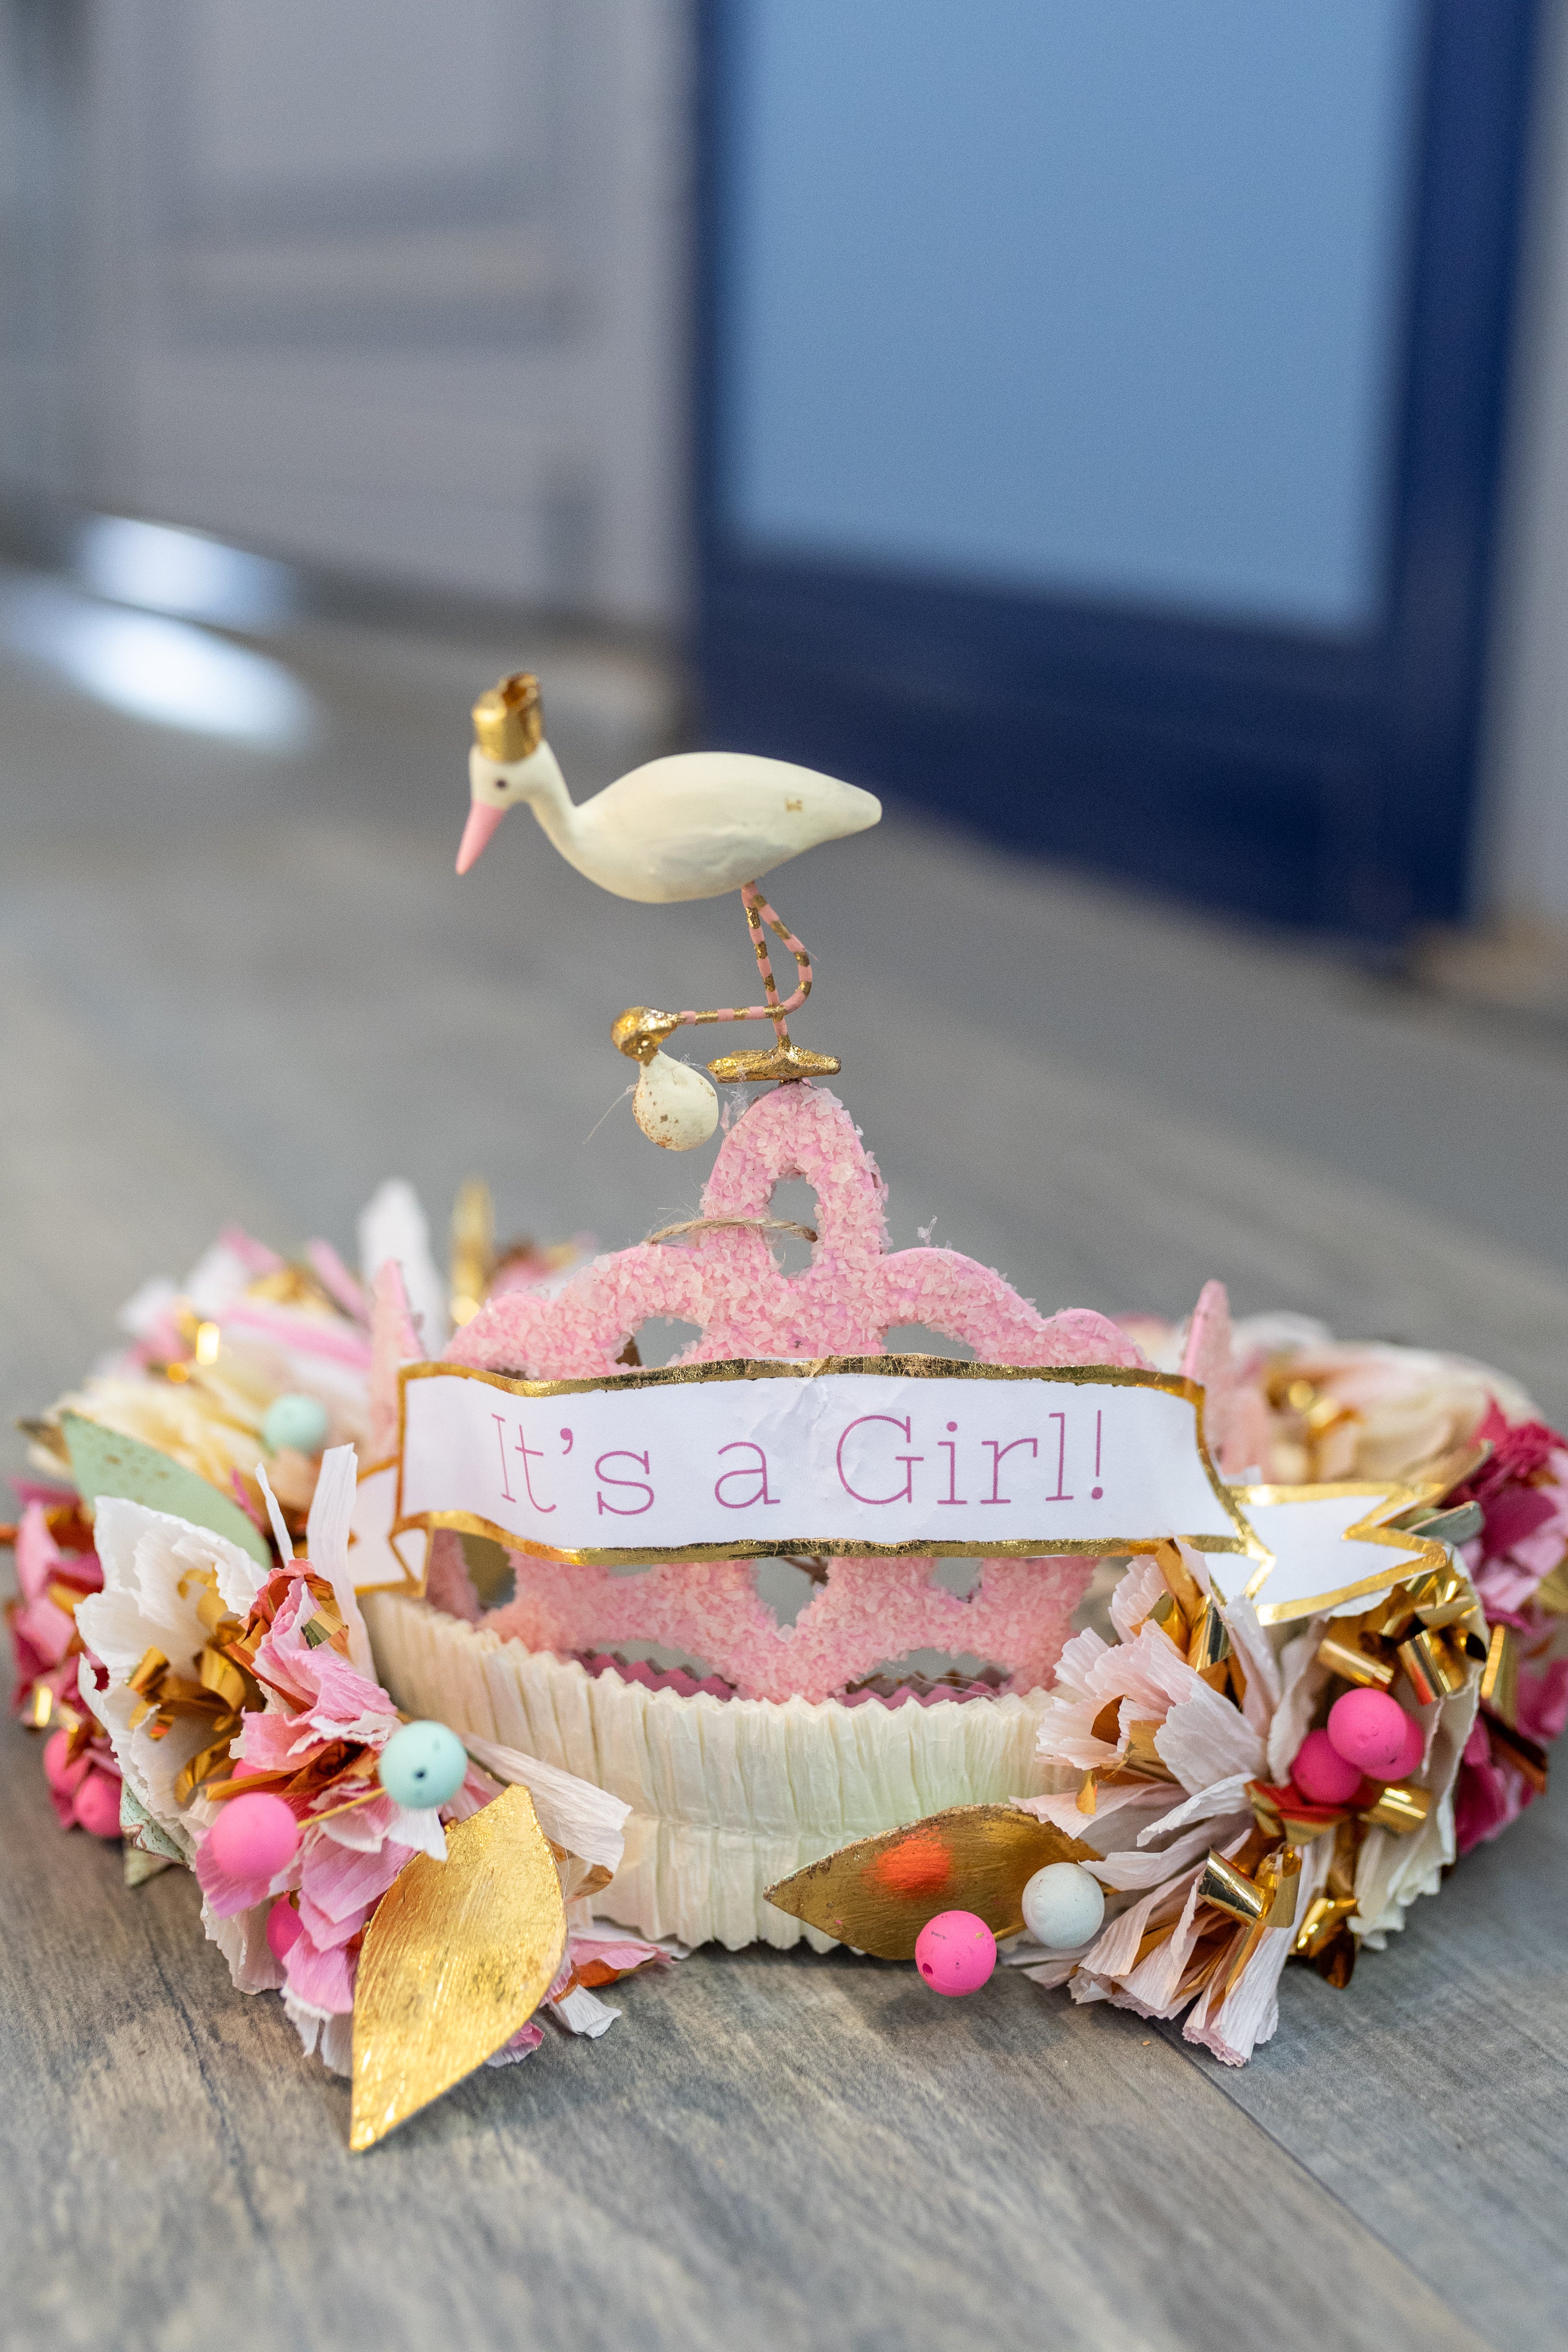 Crown - It's a Girl - Premium  from Tricia Lowenfield Shop 